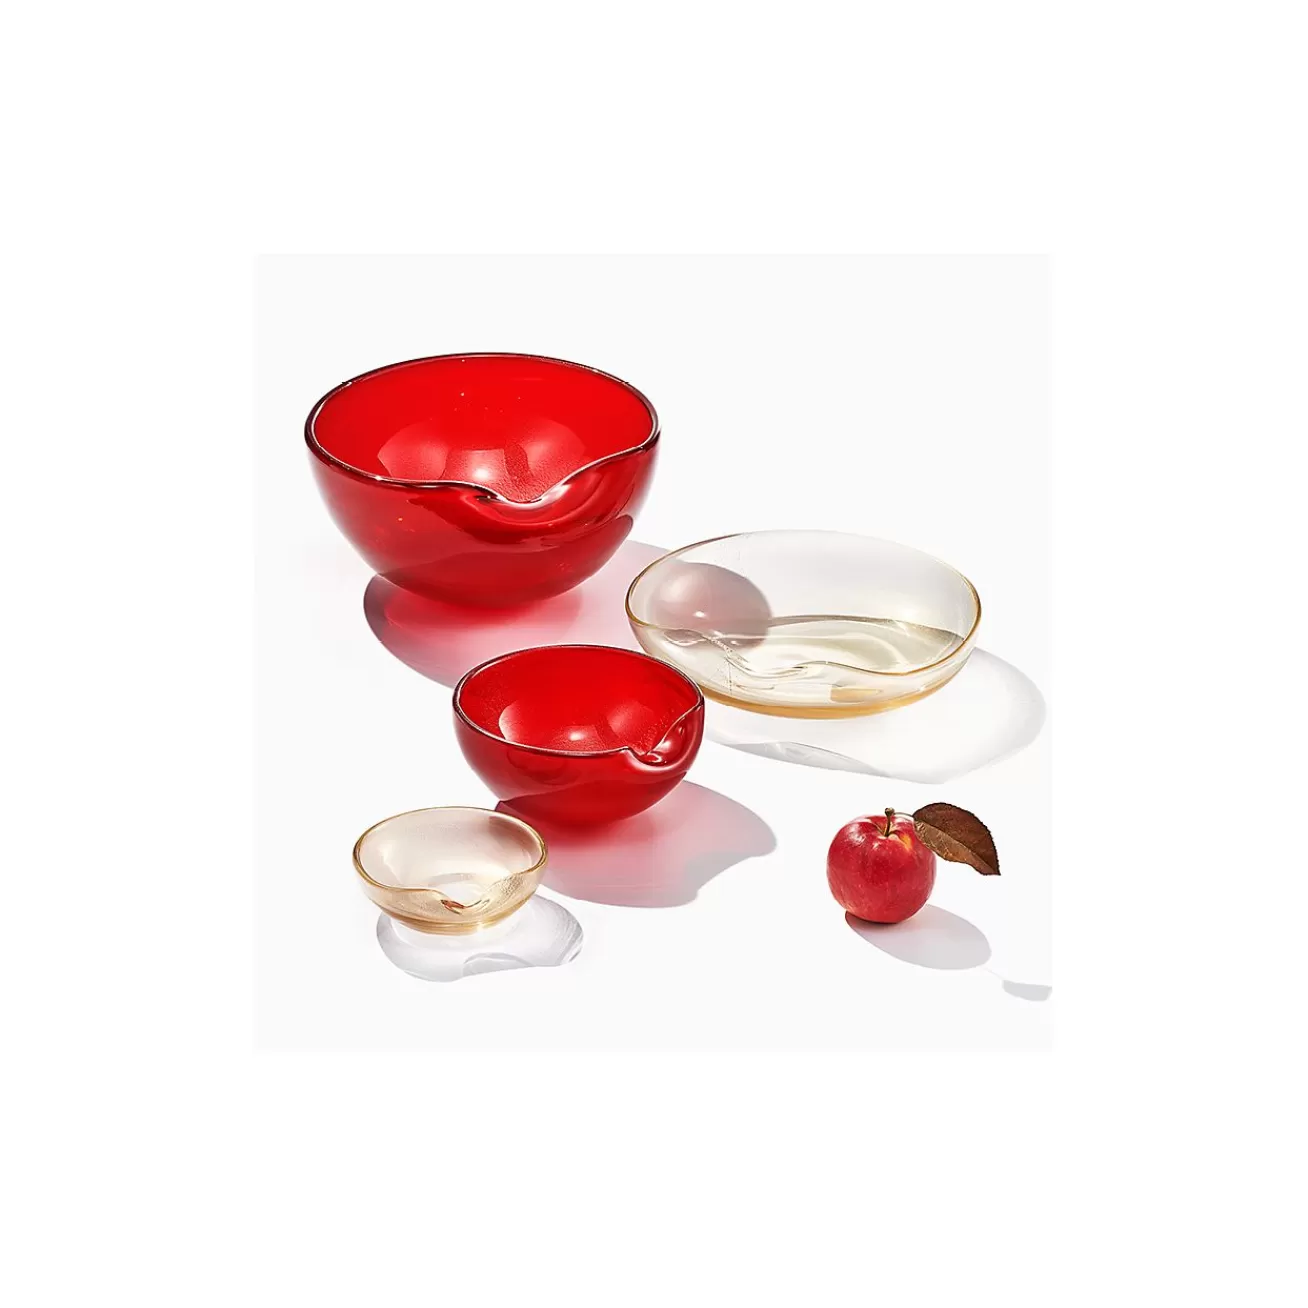 Tiffany & Co. Elsa Peretti® Thumbprint bowl in red Venetian glass. More sizes available. | ^ The Home | Housewarming Gifts